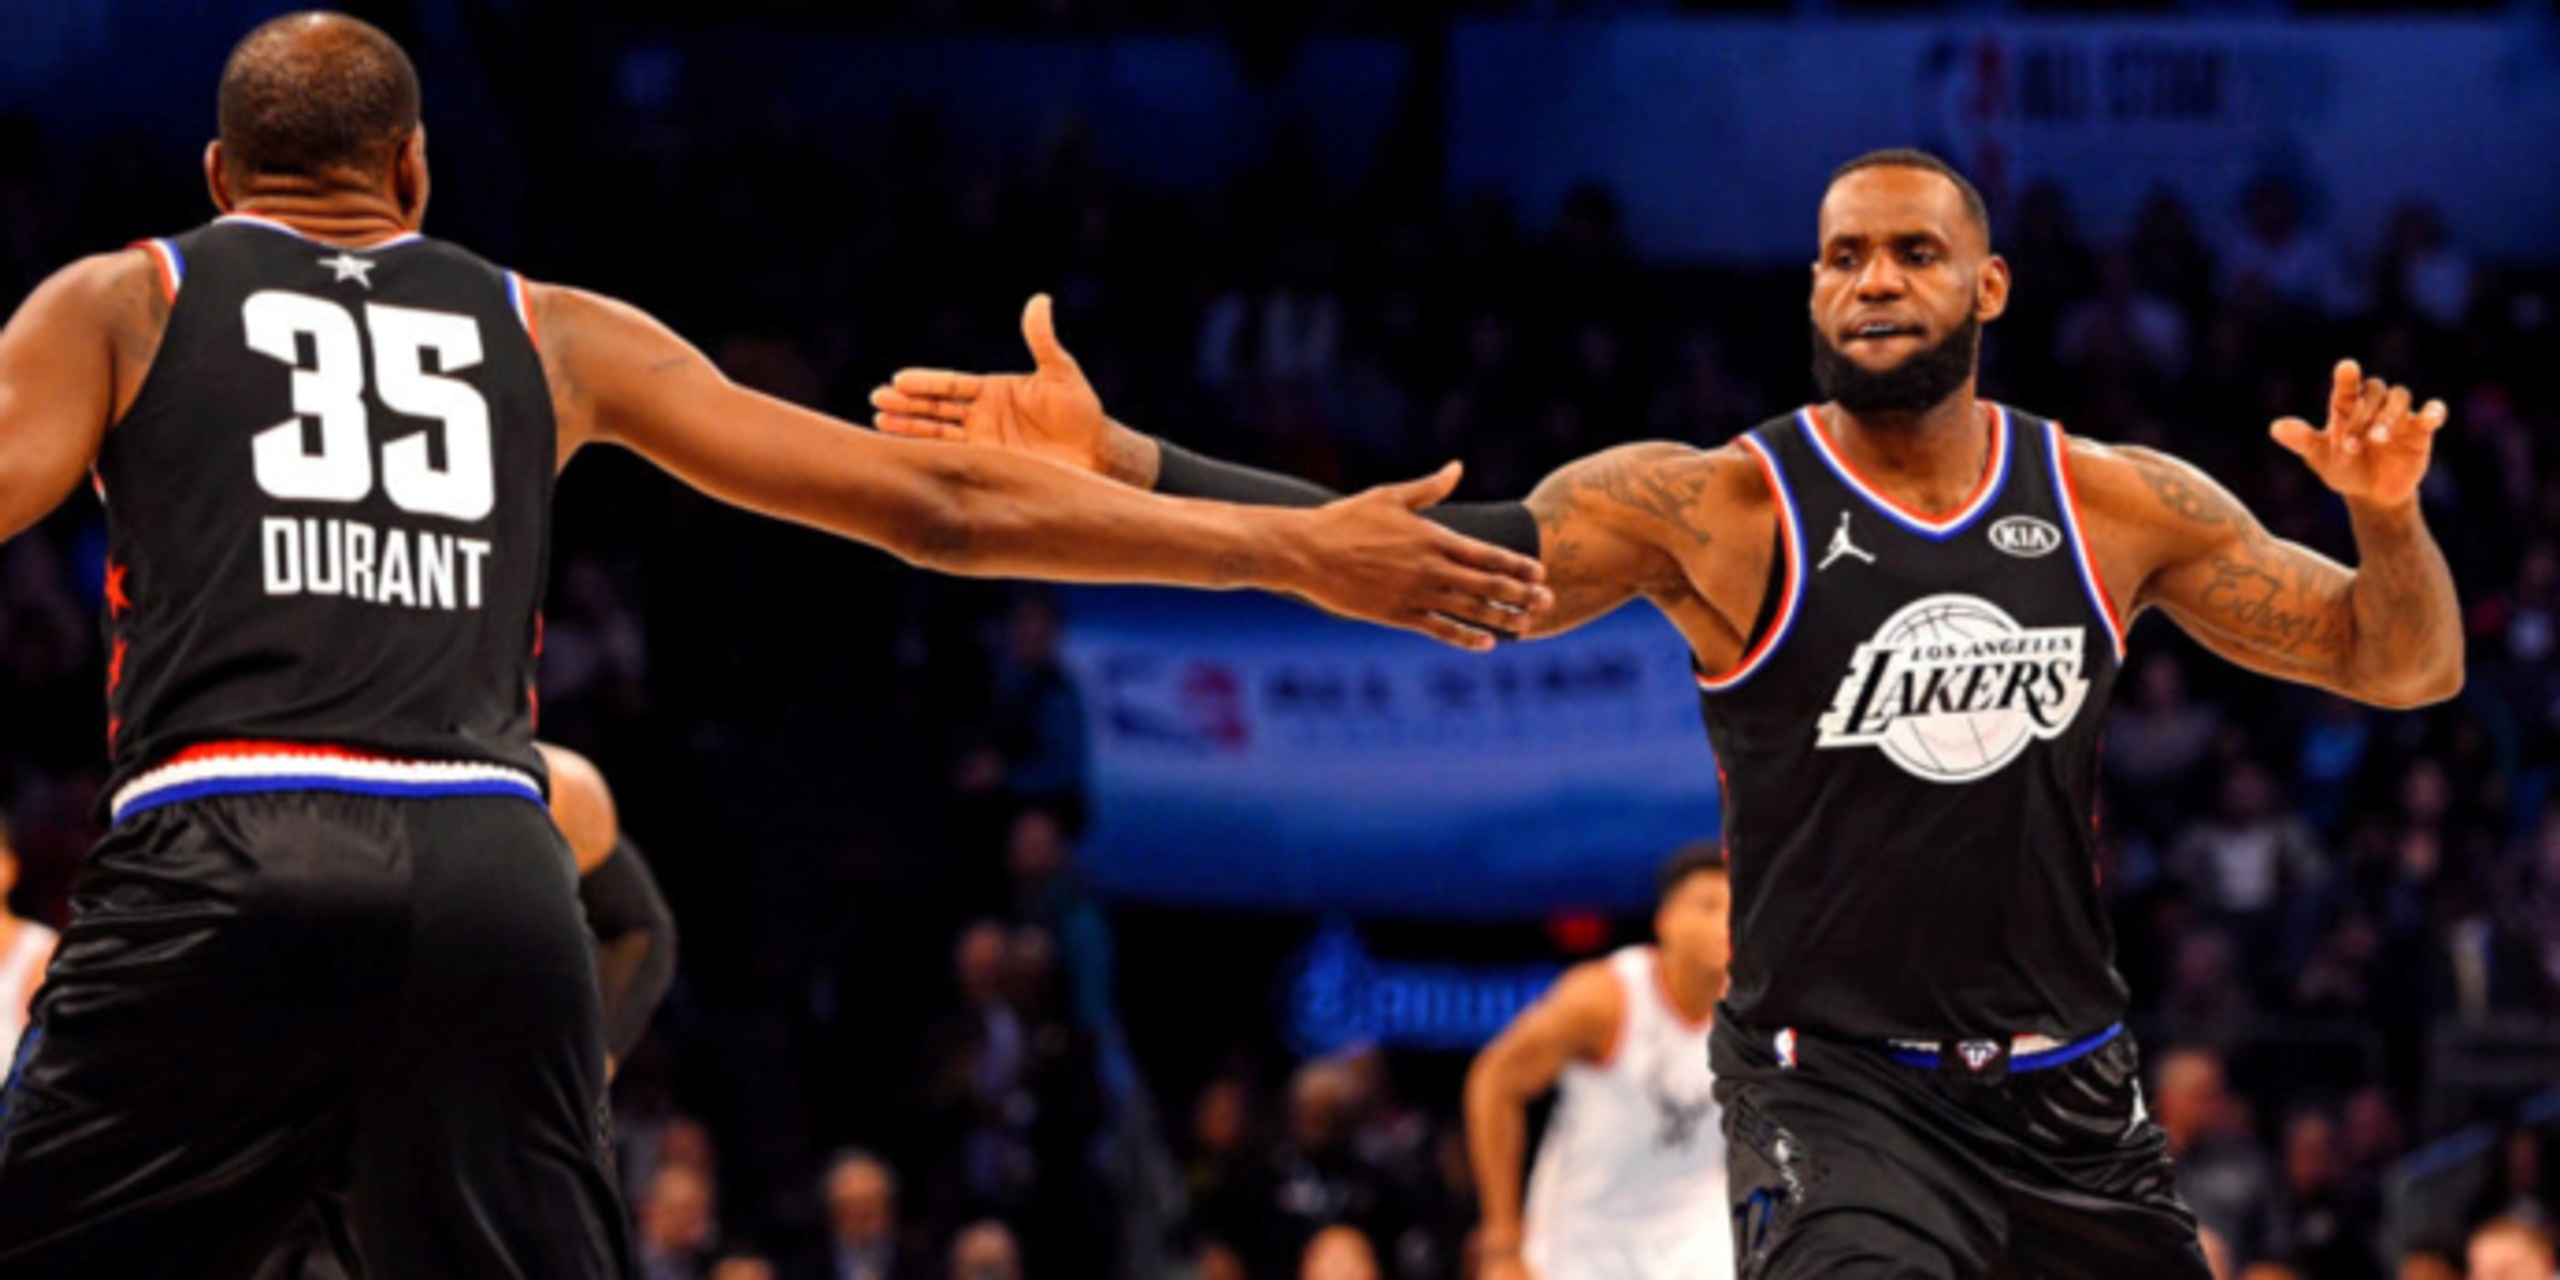 All-Star teams finalized after LeBron, Durant go head-to-head in draft